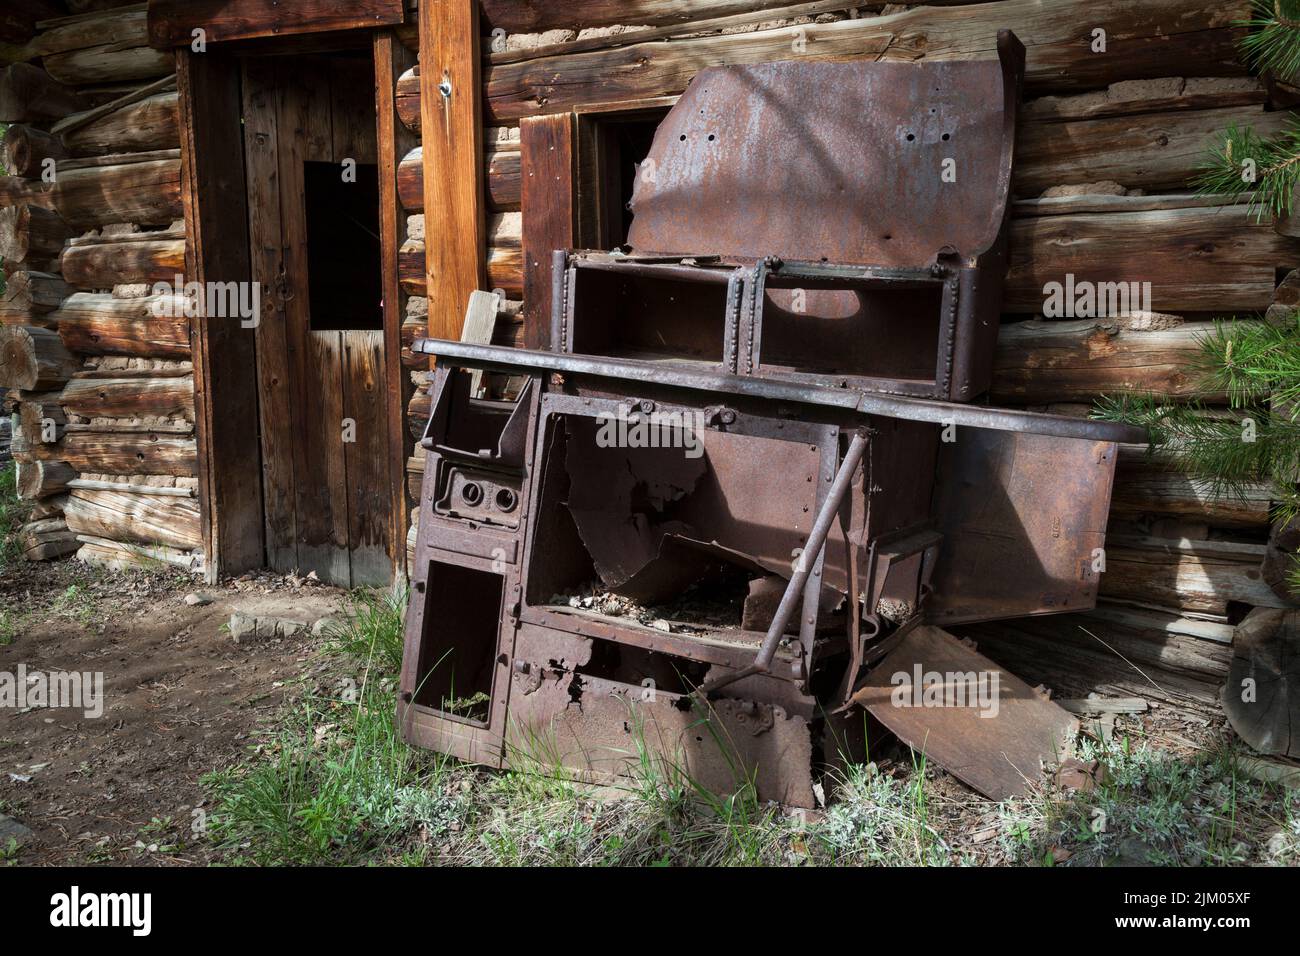 Rusted wood stove outside a miners cabin in Miners Delight, Wyoming Stock Photo